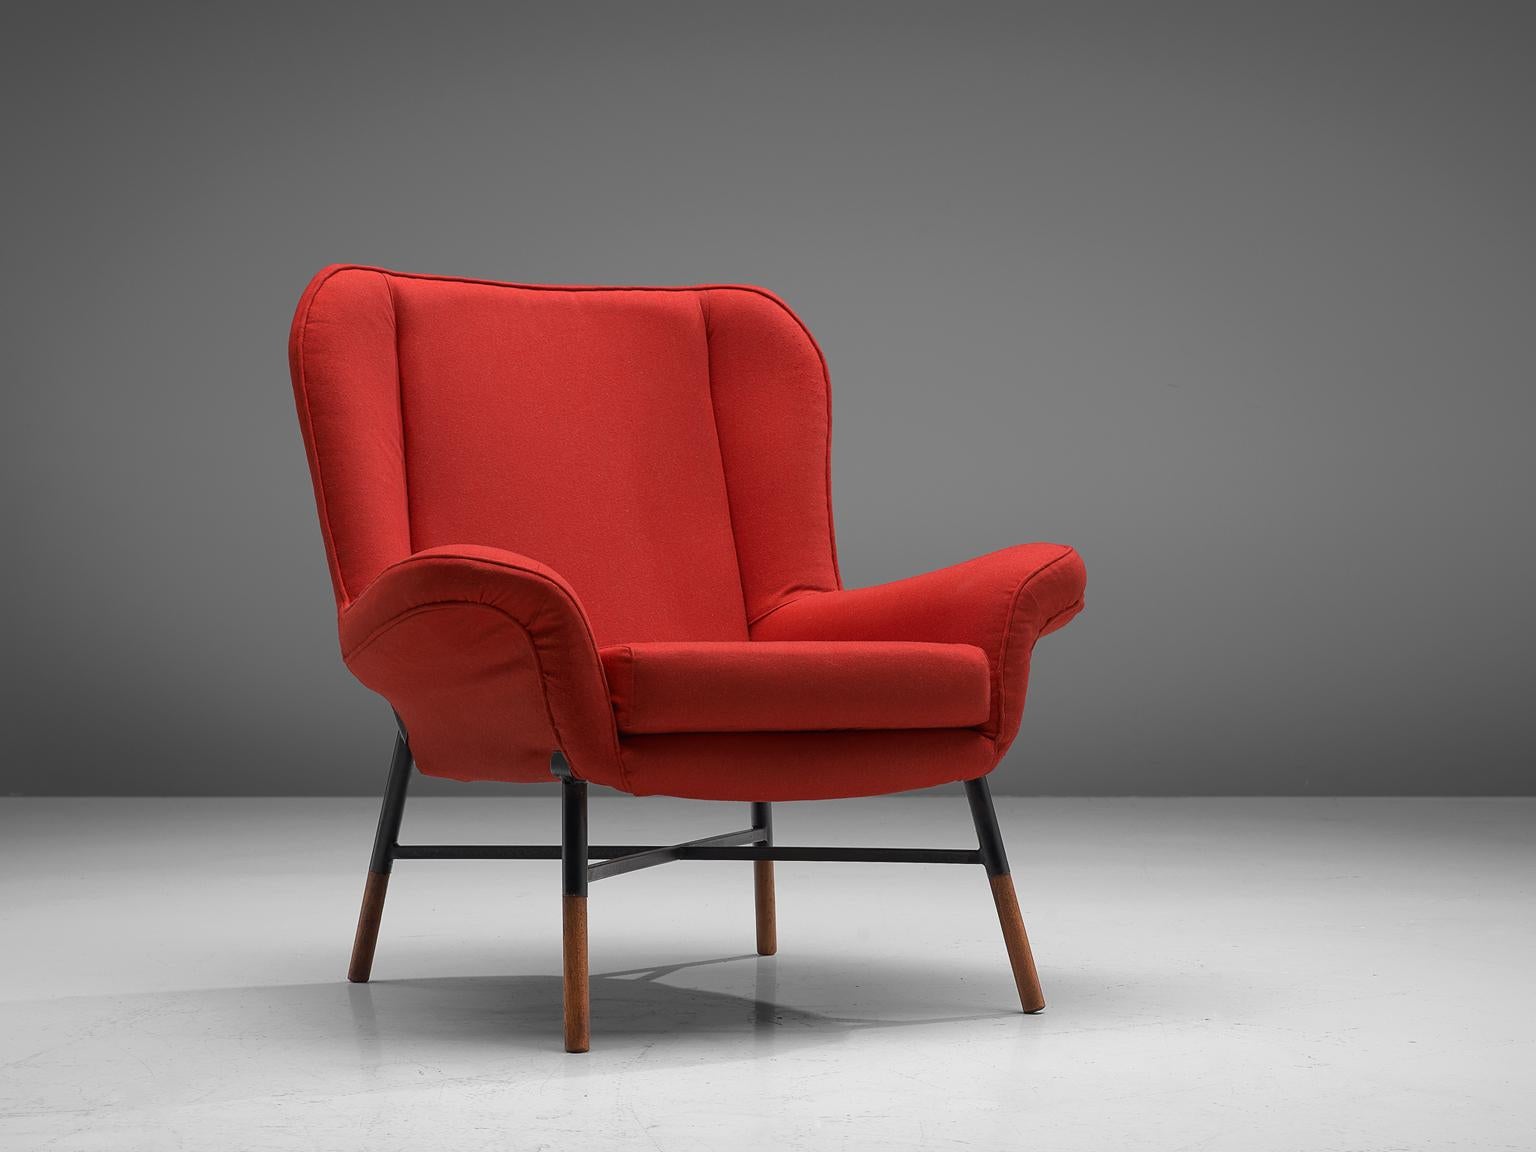 Studio B.B.P.R. for Arflex, 'Giulietta' Lounge chair, fabric, lacquered metal and wood, Italy, 1958.

Begiojoso, Peressutti and Rogers of the B.B.P.R. office designed this armchair Giulietta; An elegant lounge chair with a wide seat. The sculpted